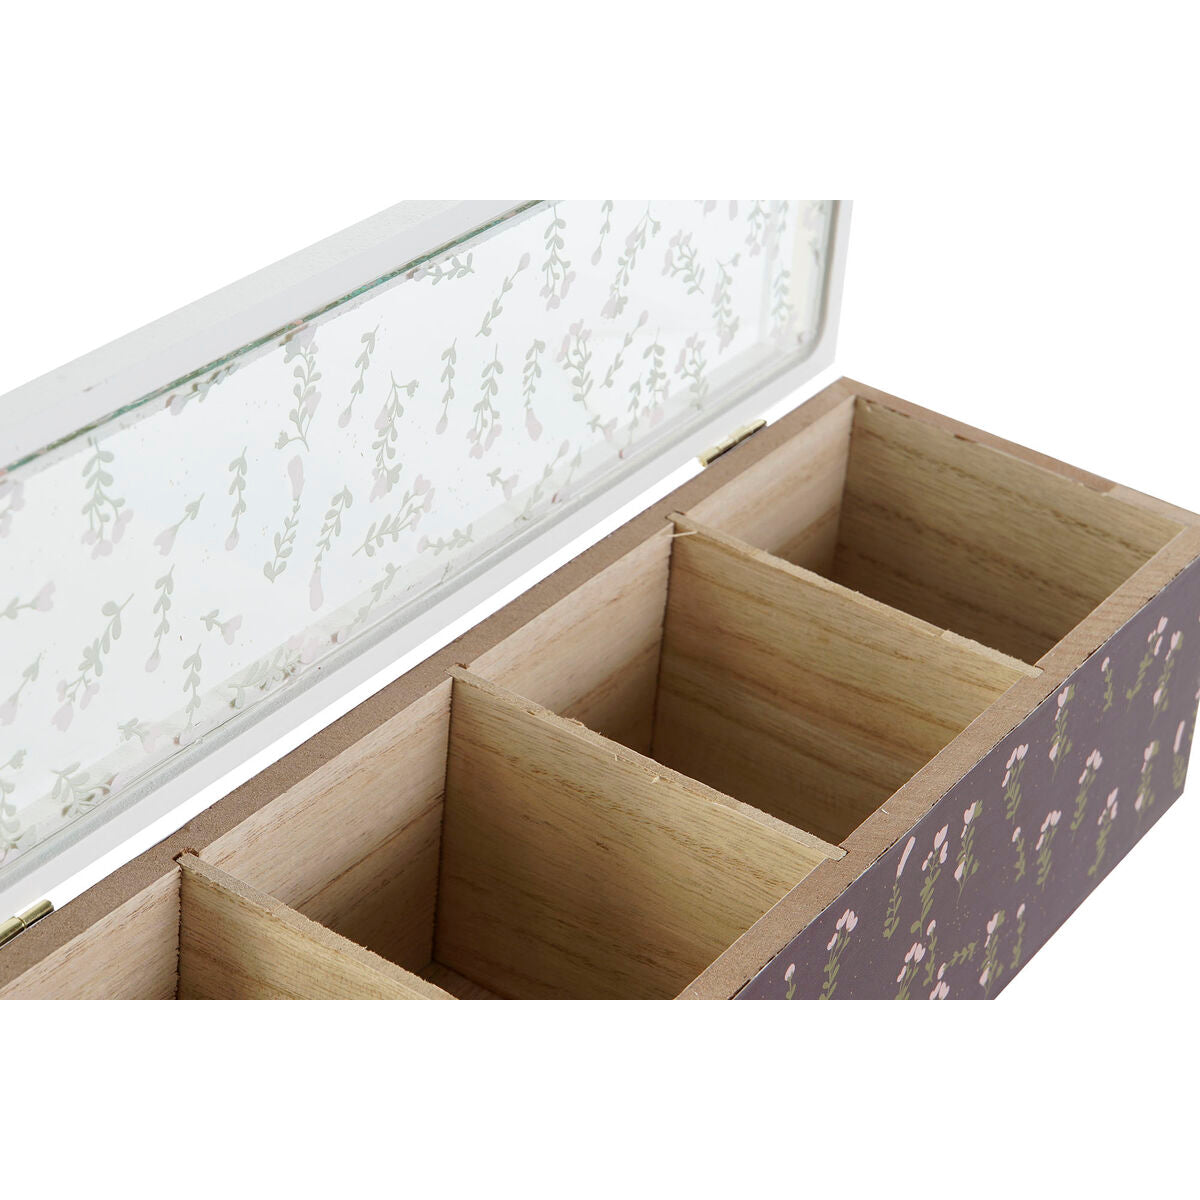 Box for Infusions DKD Home Decor Groen Mosterd Donkerbruin Kristal Hout MDF (4 Stuks)